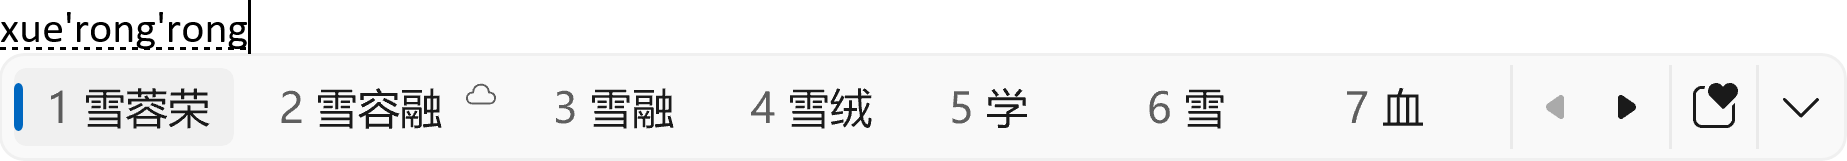 Simplified Chinese IME candidate window with a word suggestion from Bing at the second place